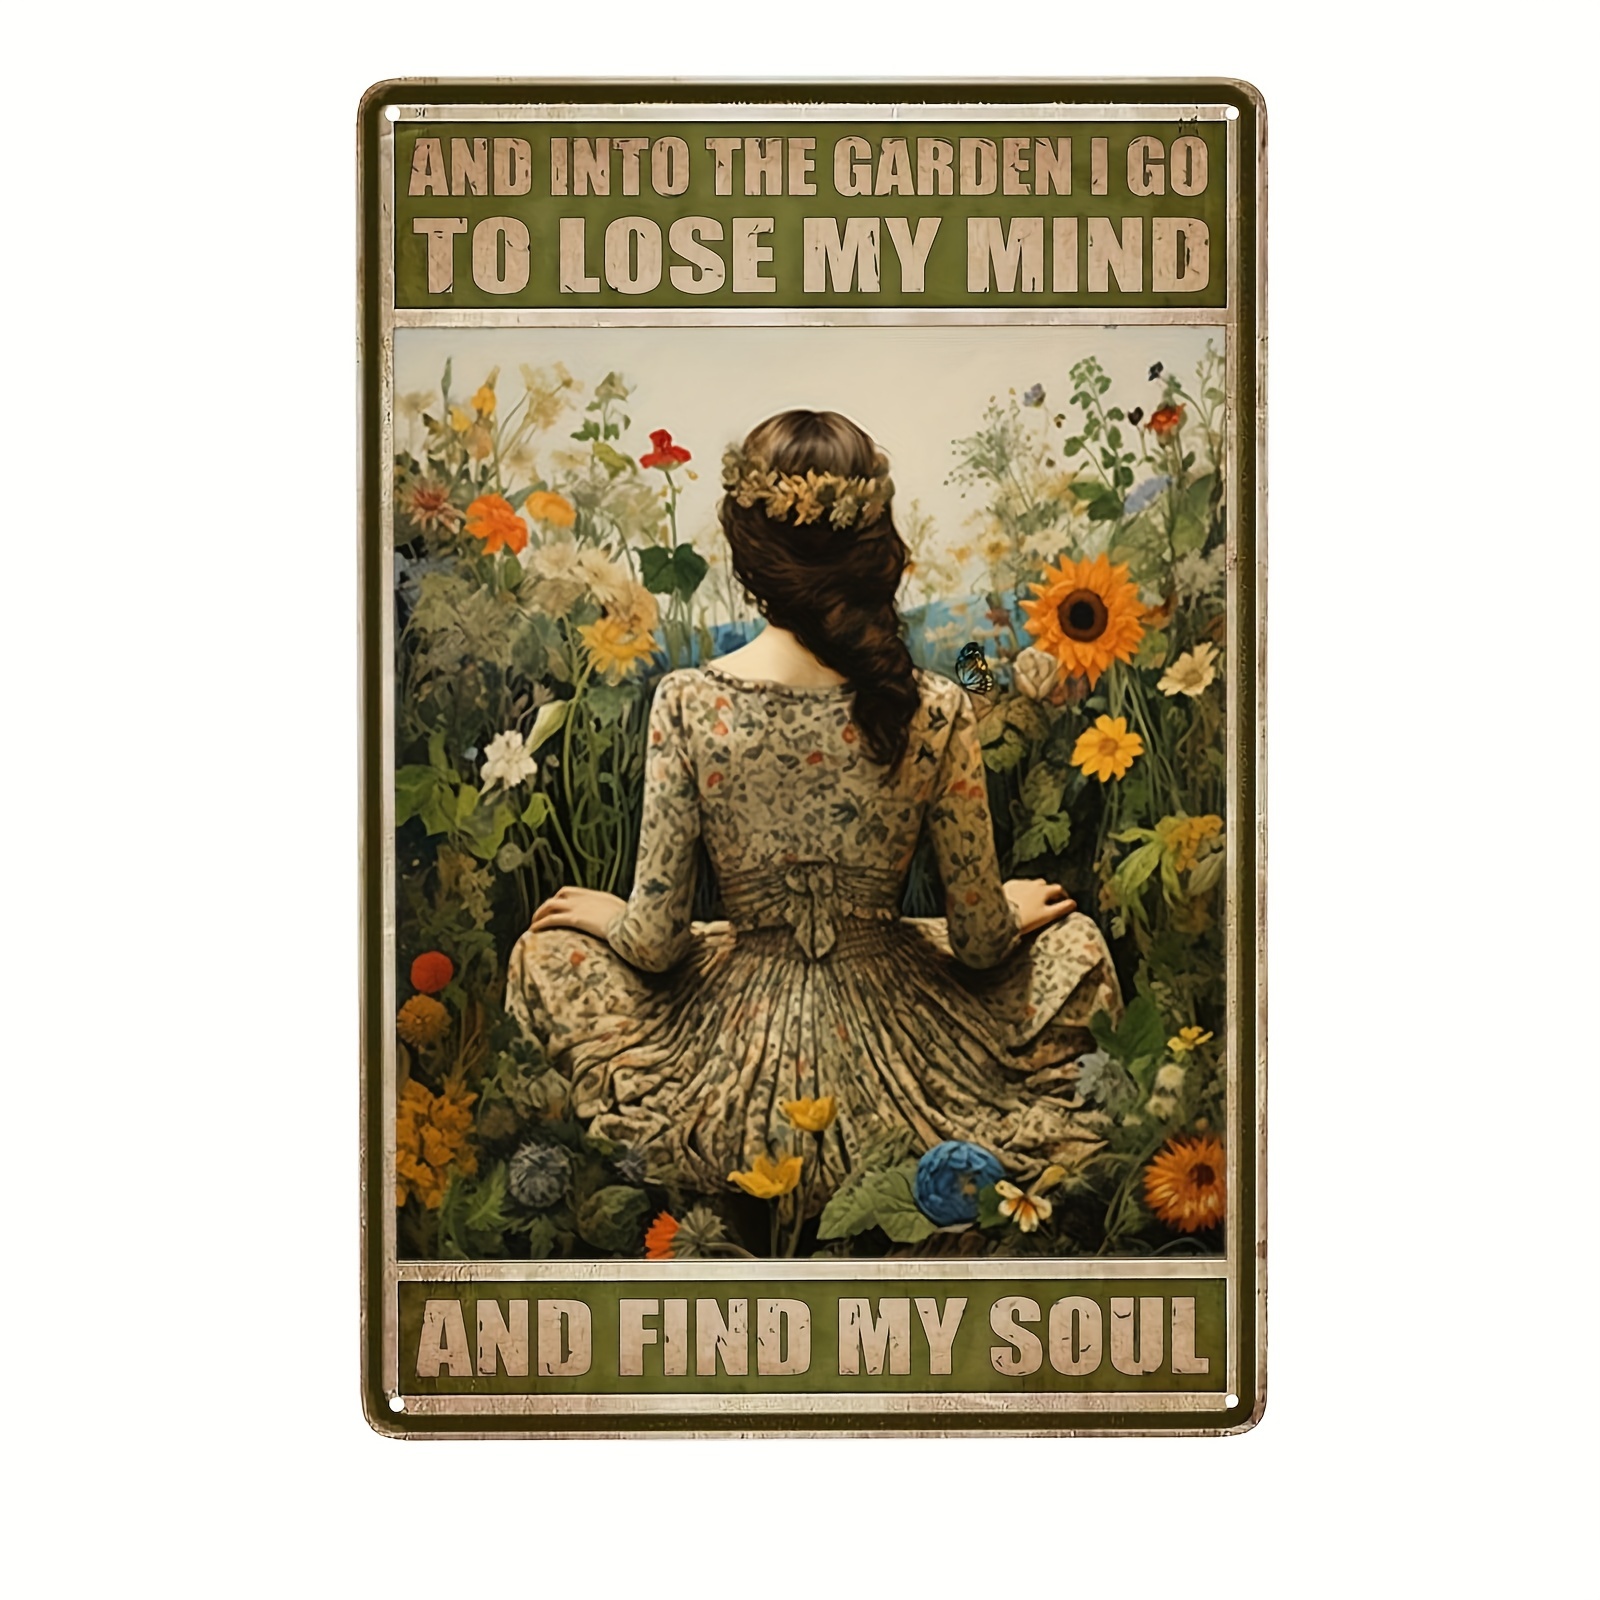 

1pc Funny Garden Decor Sign, Into The Garden I Go To Lose My Mind And Find My Soul Sign, Gardening Gift For Women, Hippie Garden Decor Retro Vintage Metal Tin Sign For Home Outdoor Patio 8x12 Inch